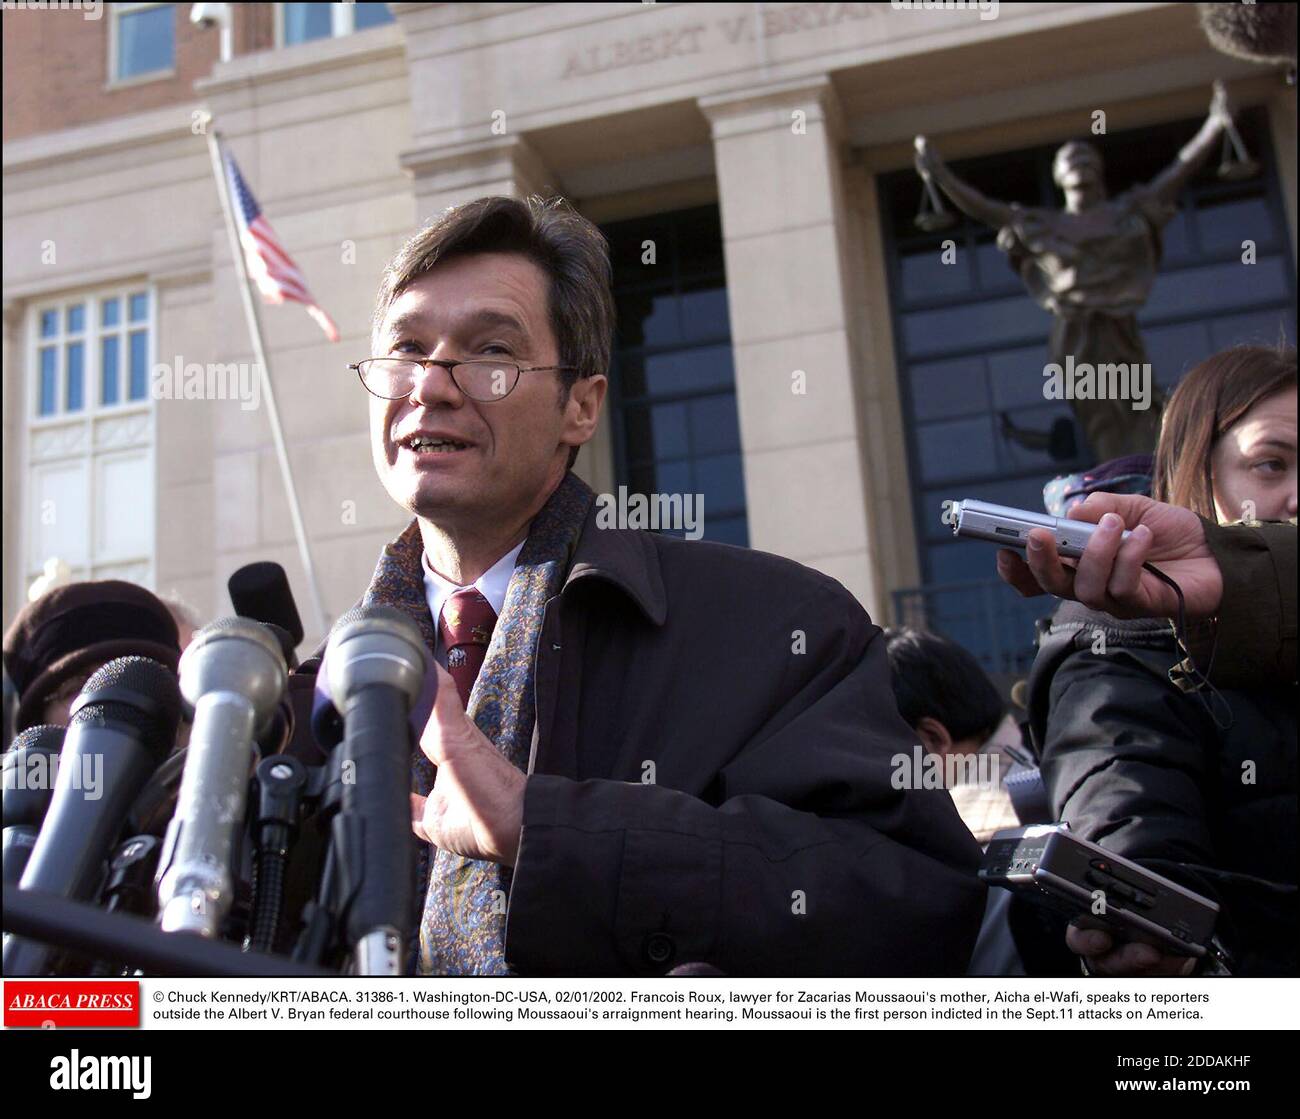 NO FILM, NO VIDEO, NO TV, NO DOCUMENTARY - © Chuck Kennedy/KRT/ABACA. 31386-1. Washington-DC-USA, 02/01/2002. Francois Roux, lawyer for Zacarias Moussaoui's mother, Aicha el-Wafi, speaks to reporters outside the Albert V. Bryan federal courthouse following Moussaoui's arraignment hearing. Moussaou Stock Photo